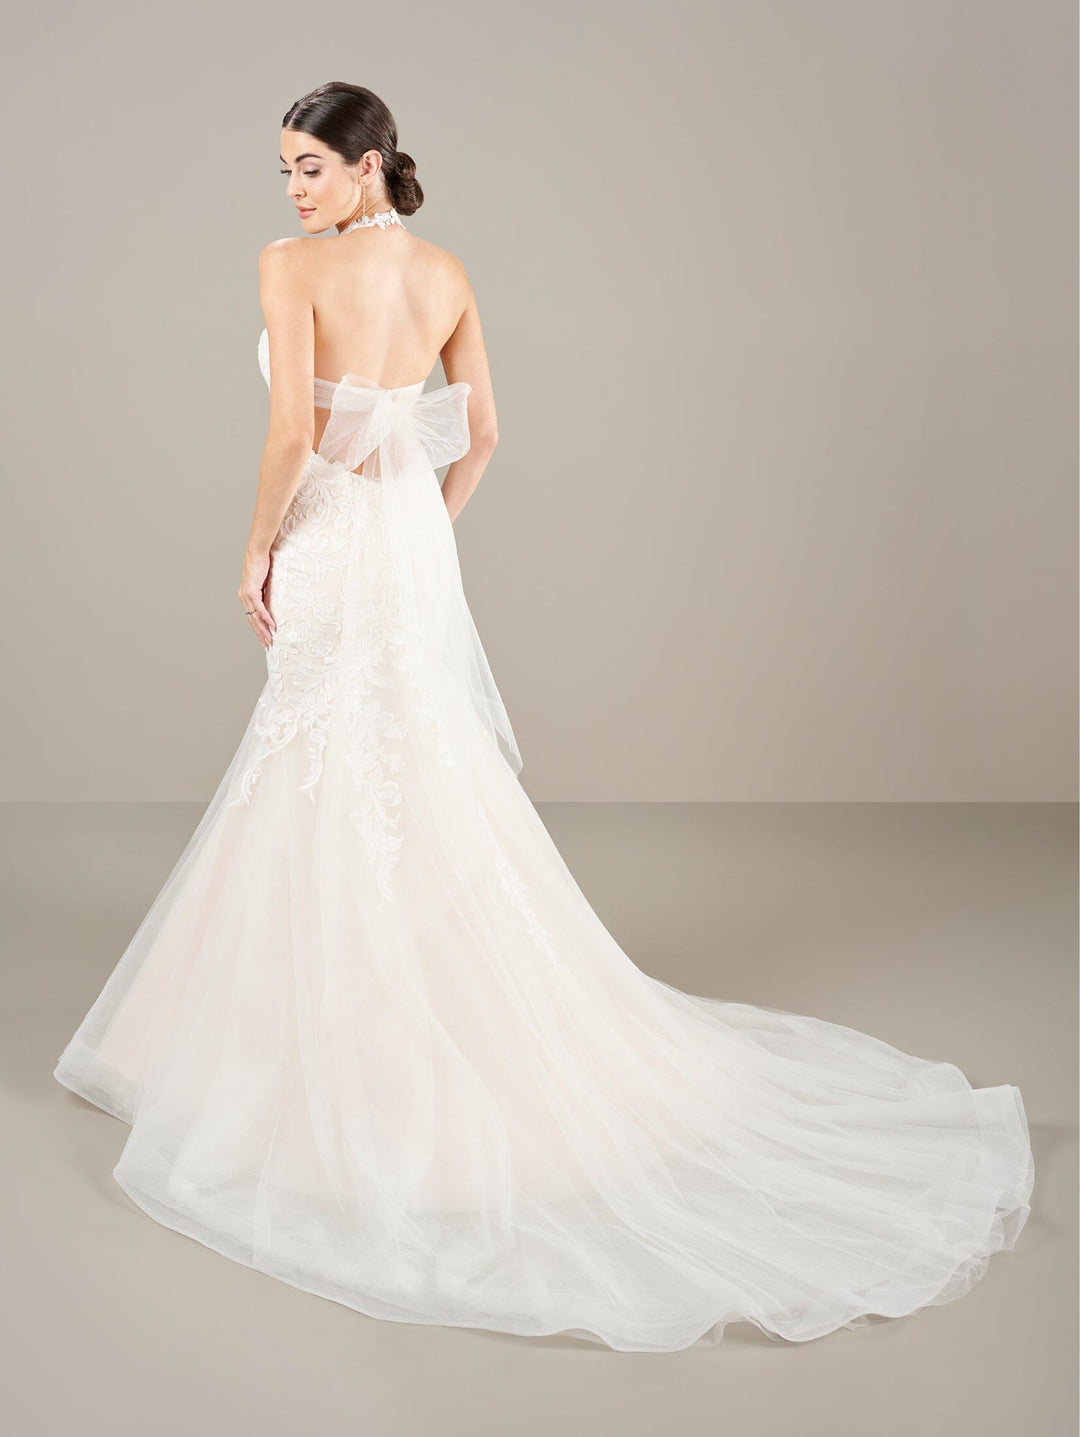 Applique Halter Mermaid Bridal Gown by Adrianna Papell 31284